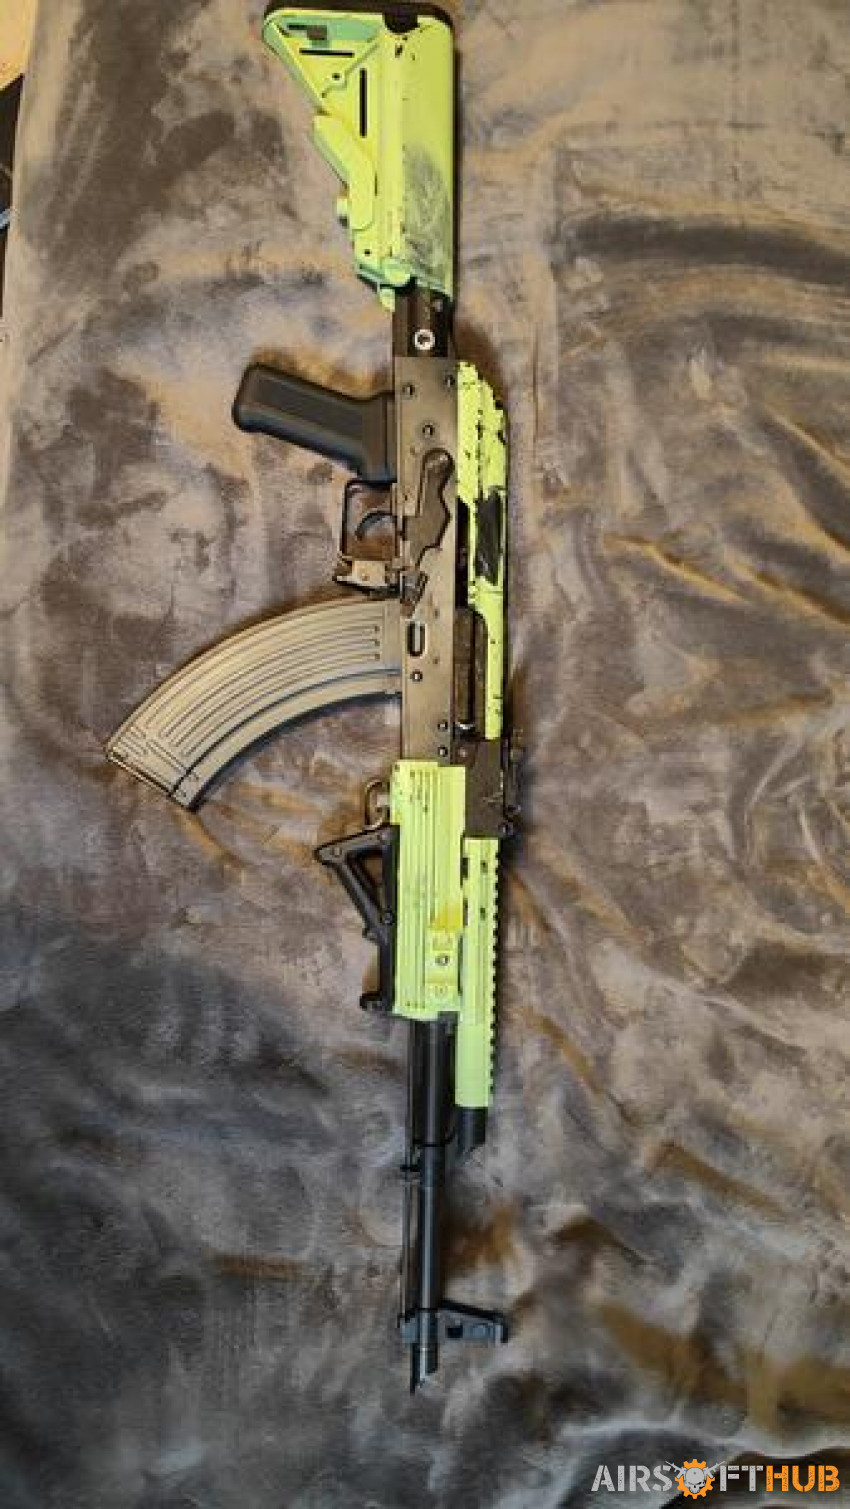 WE AK47 PMC - Used airsoft equipment